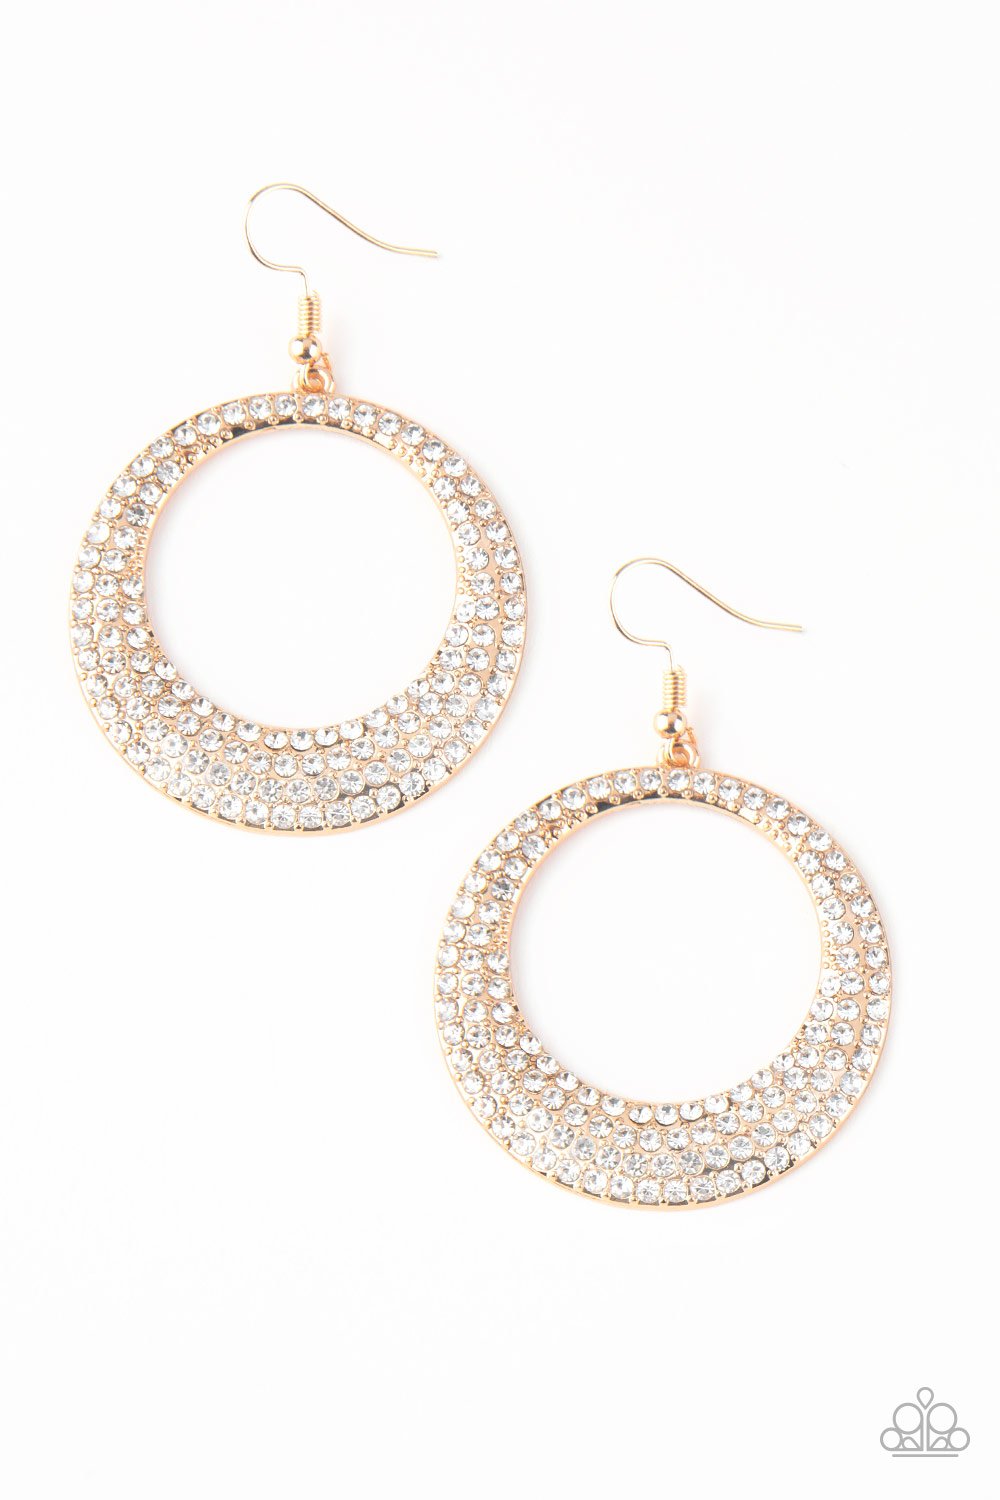 Paparazzi Very Victorious Gold Fishhook Earrings